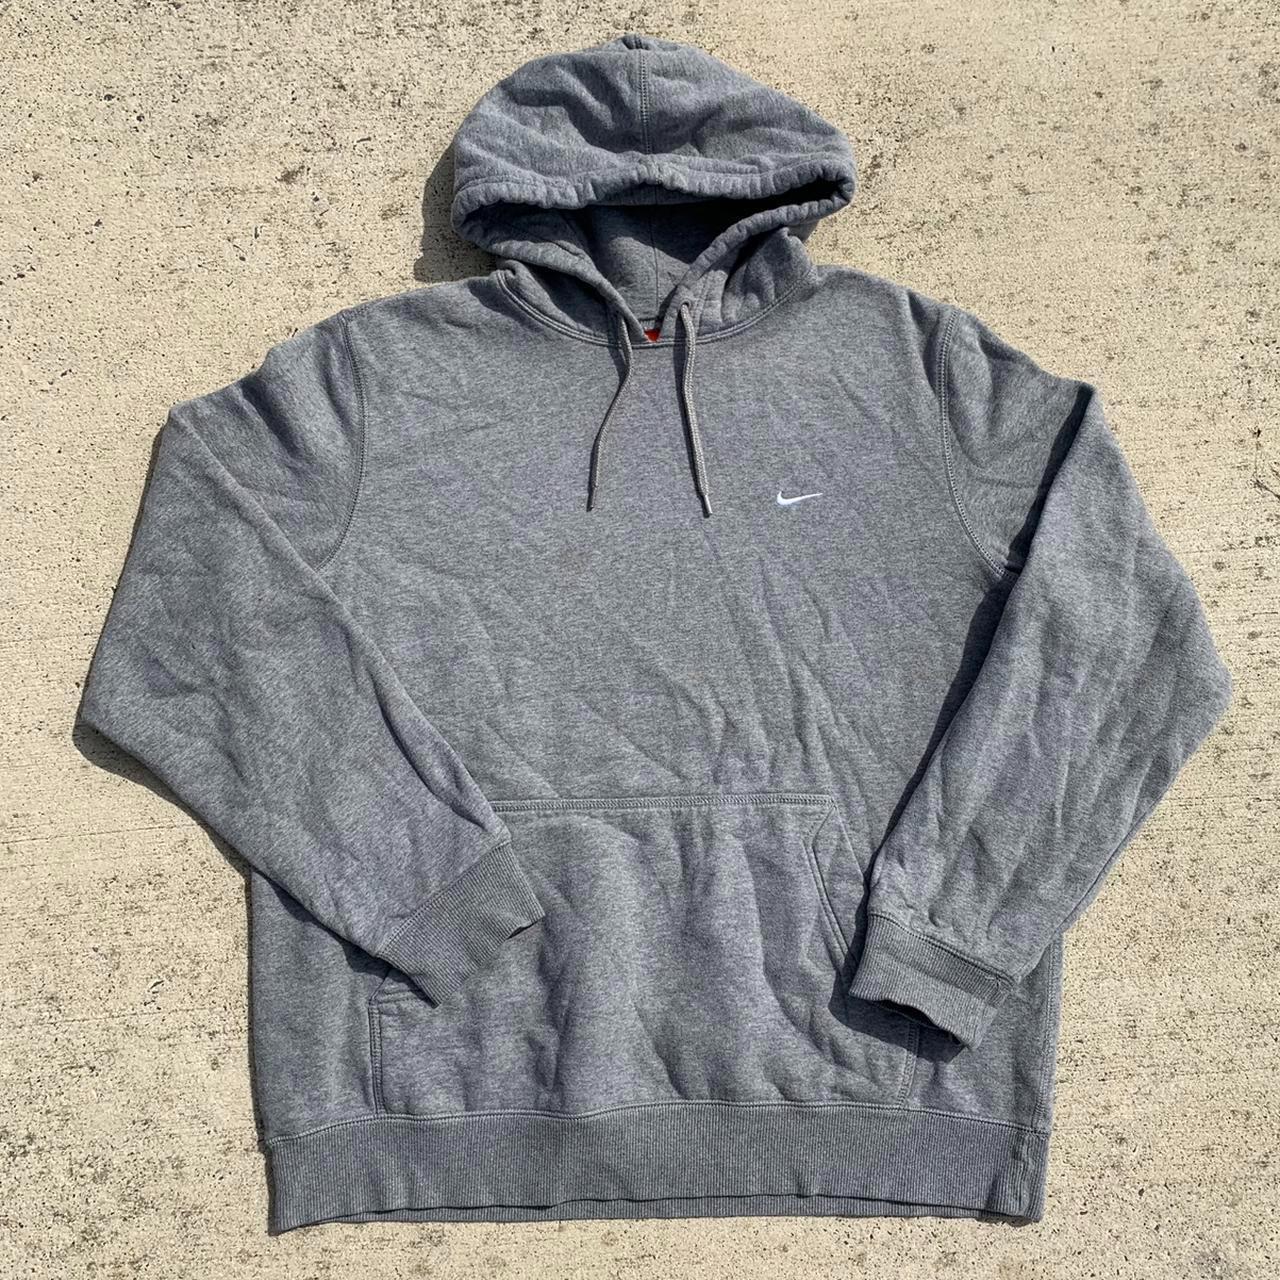 Product Image 1 - Nike essentials swoosh hoodie
Condition: used,